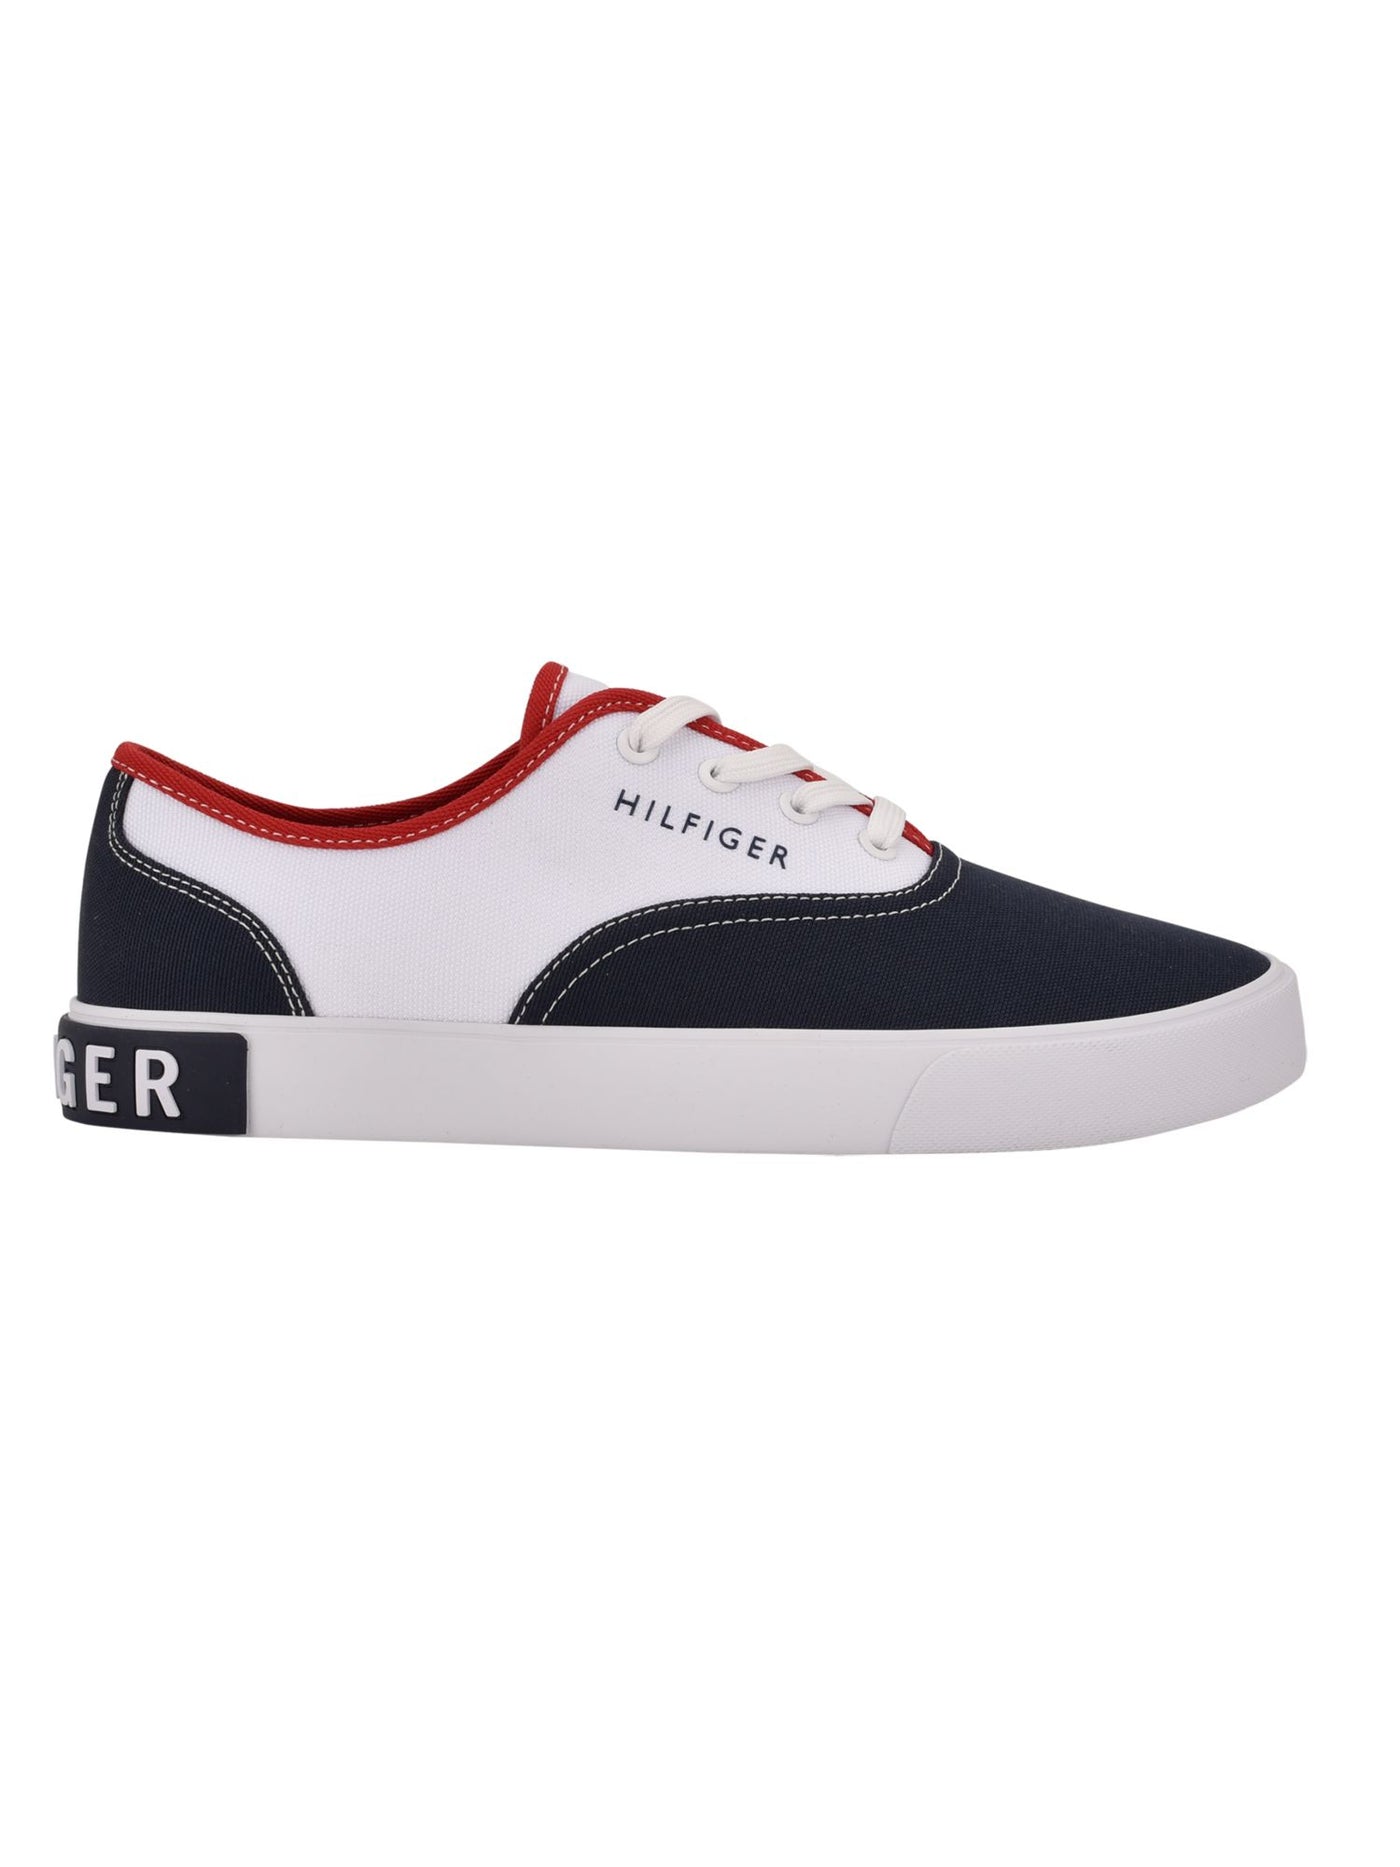 TOMMY HILFIGER Mens Navy Color Block Cushioned Comfort Ralem Round Toe Platform Lace-Up Sneakers Shoes 10.5 M